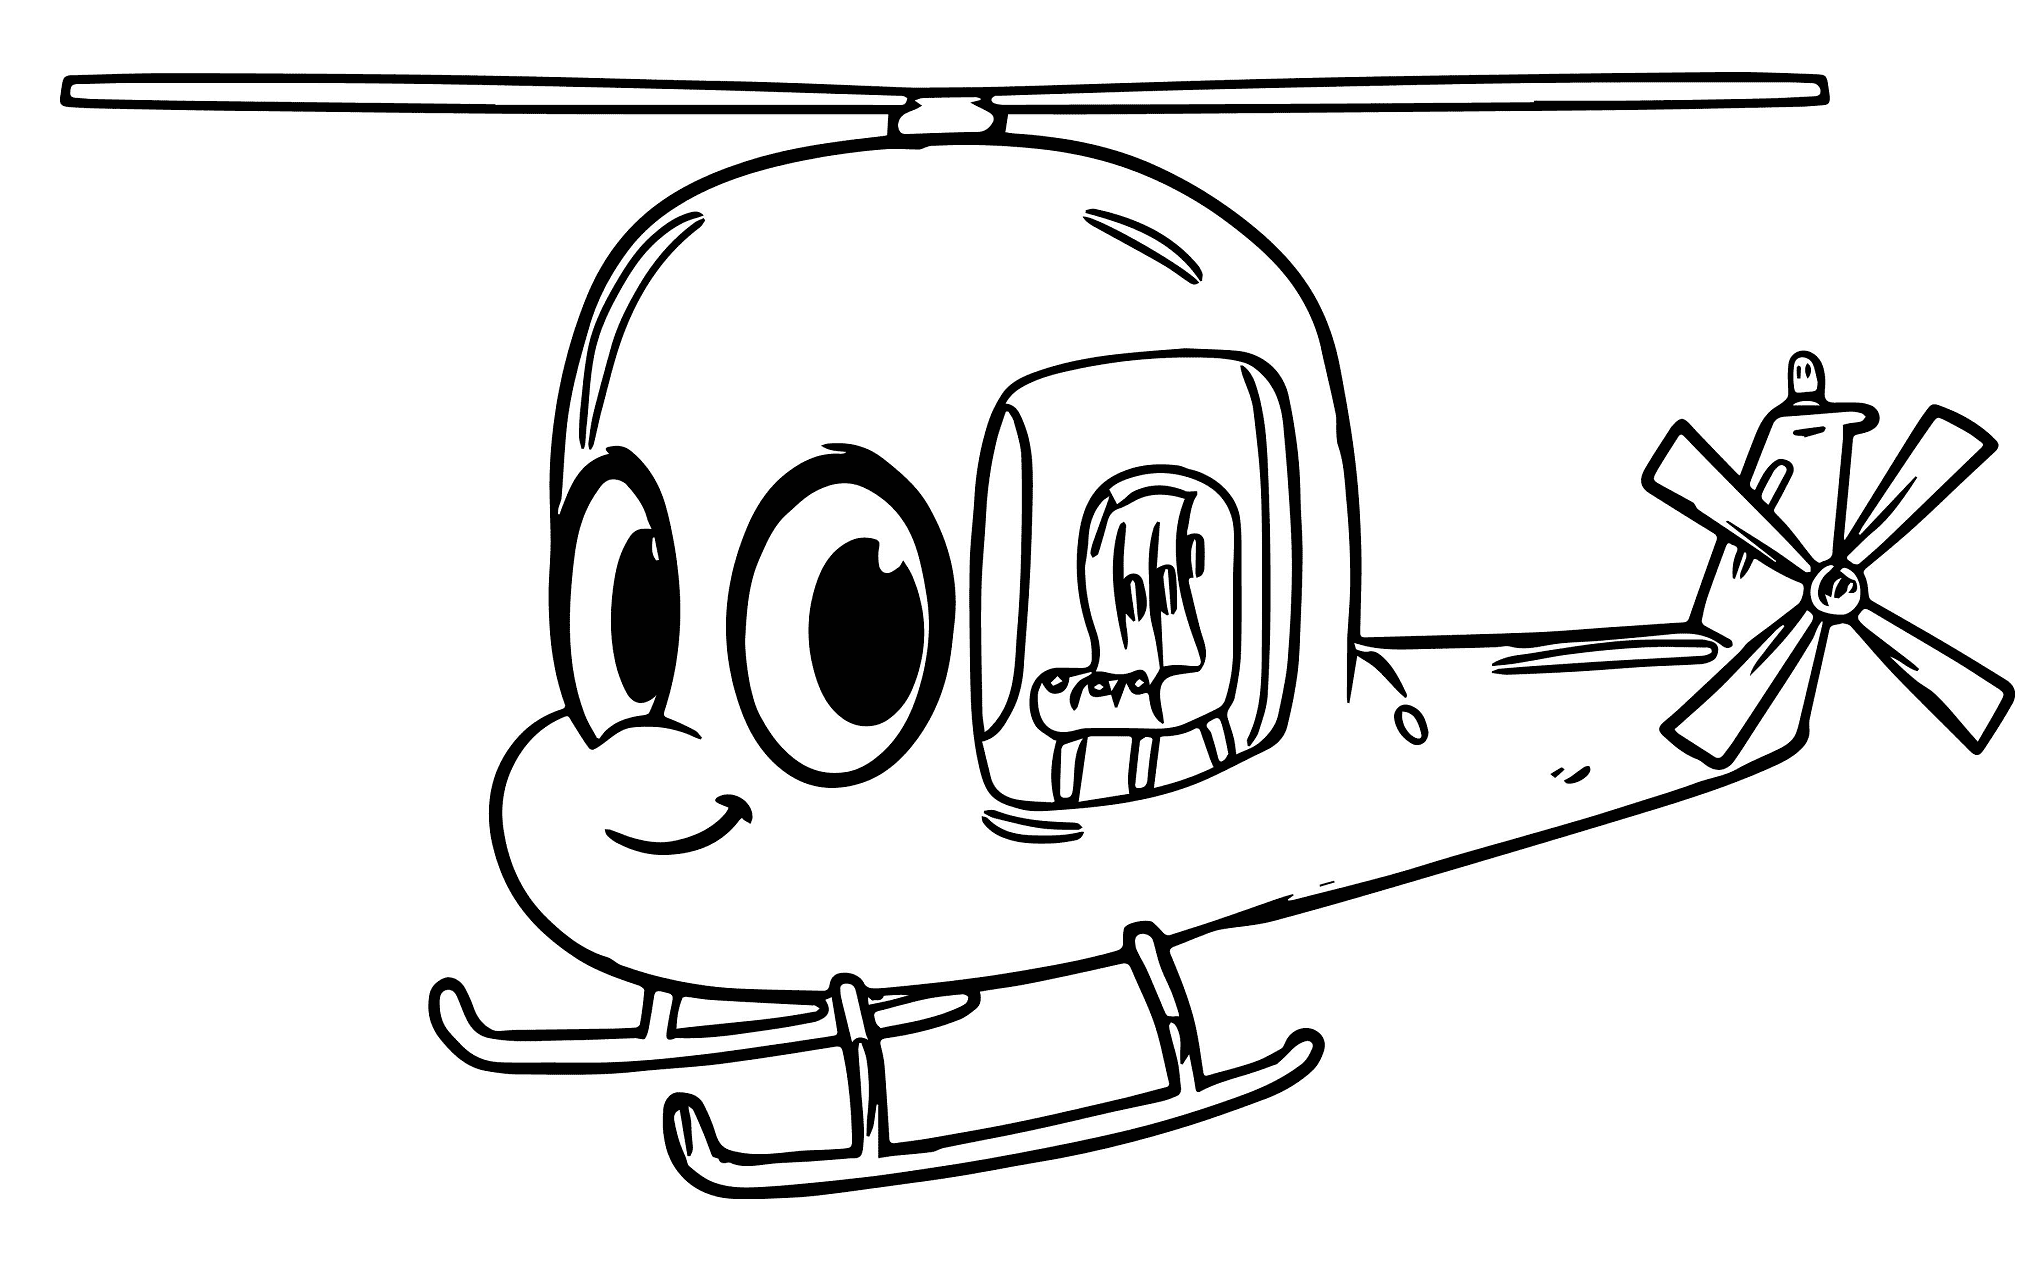 Cute Cartoon Helicopter Coloring Pages - Helicopter Coloring Pages -  Coloring Pages For Kids And Adults